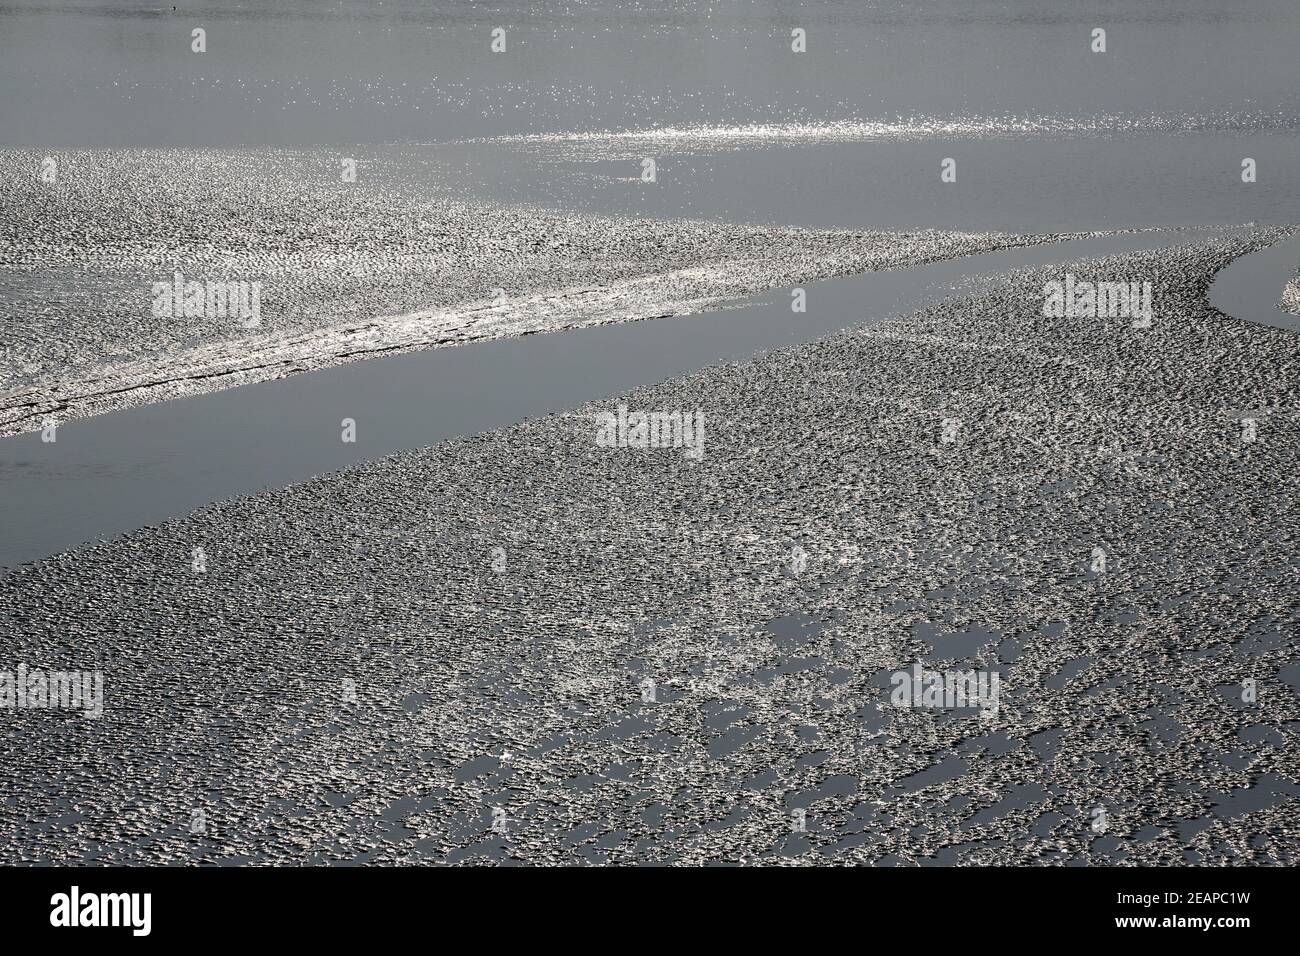 Mud beds on the river Matla during low tide the water in the Canning Town, India on February 13, 2014. Stock Photo